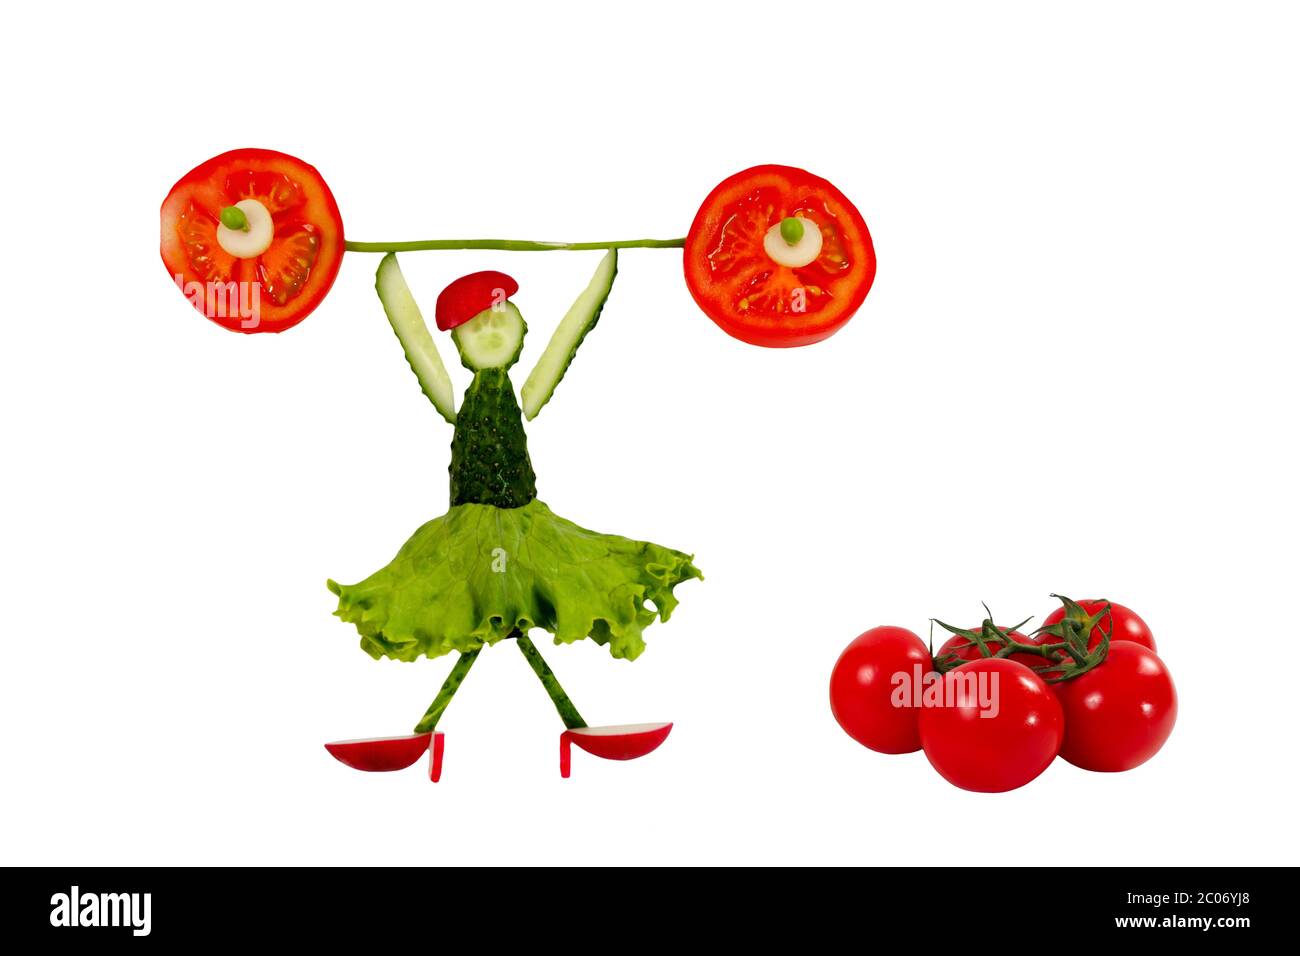 Healthy eating. Funny little woman of the cucumber slices raises tomato bar. Stock Photo